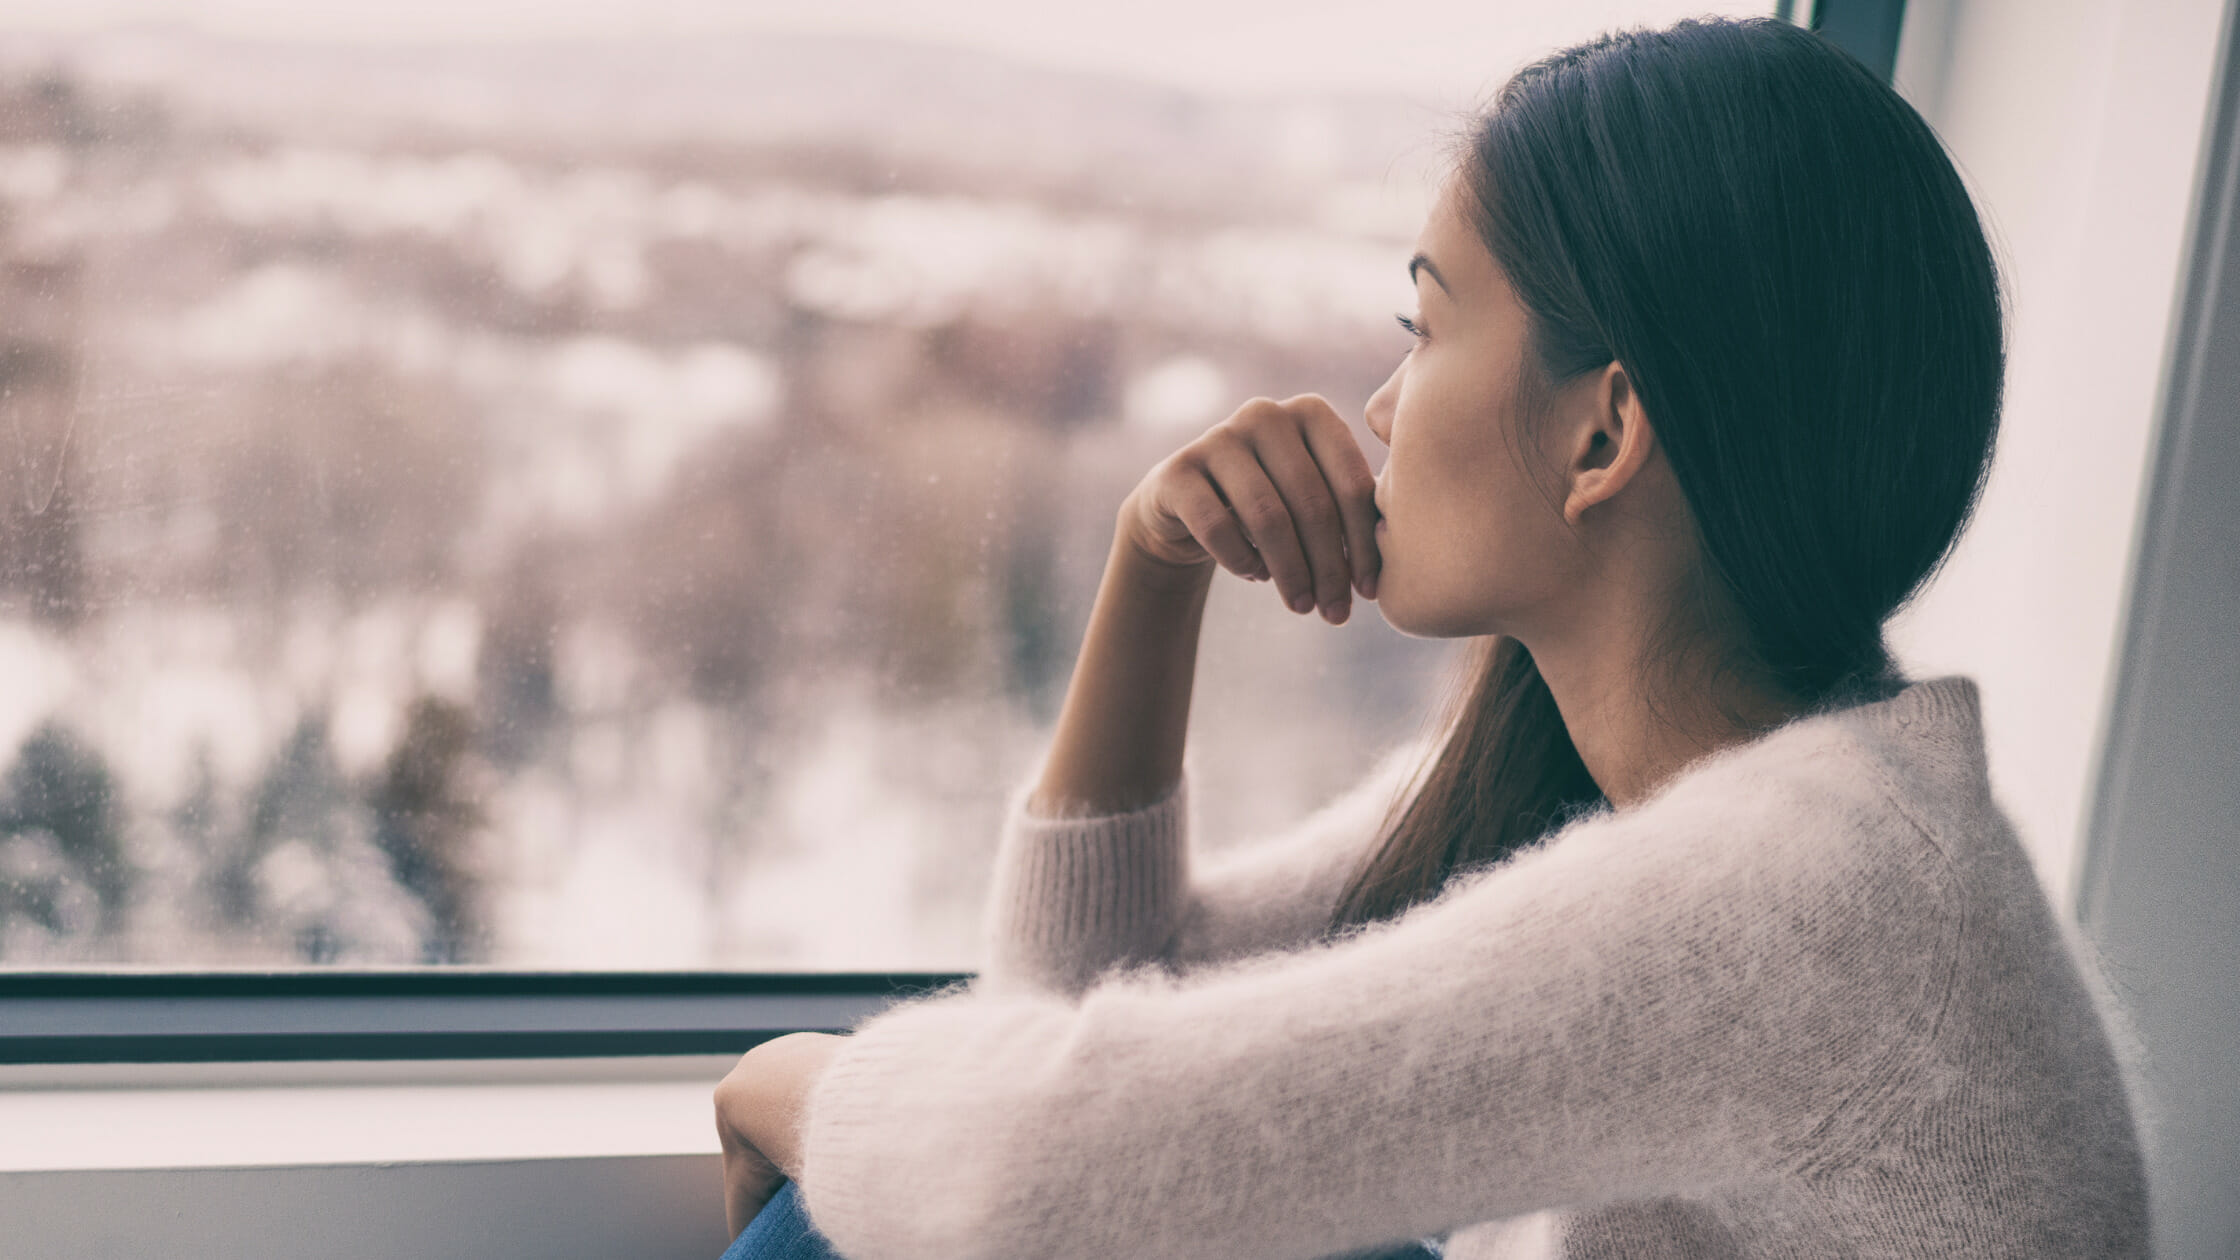 Woman looking out the window intensely and pondering